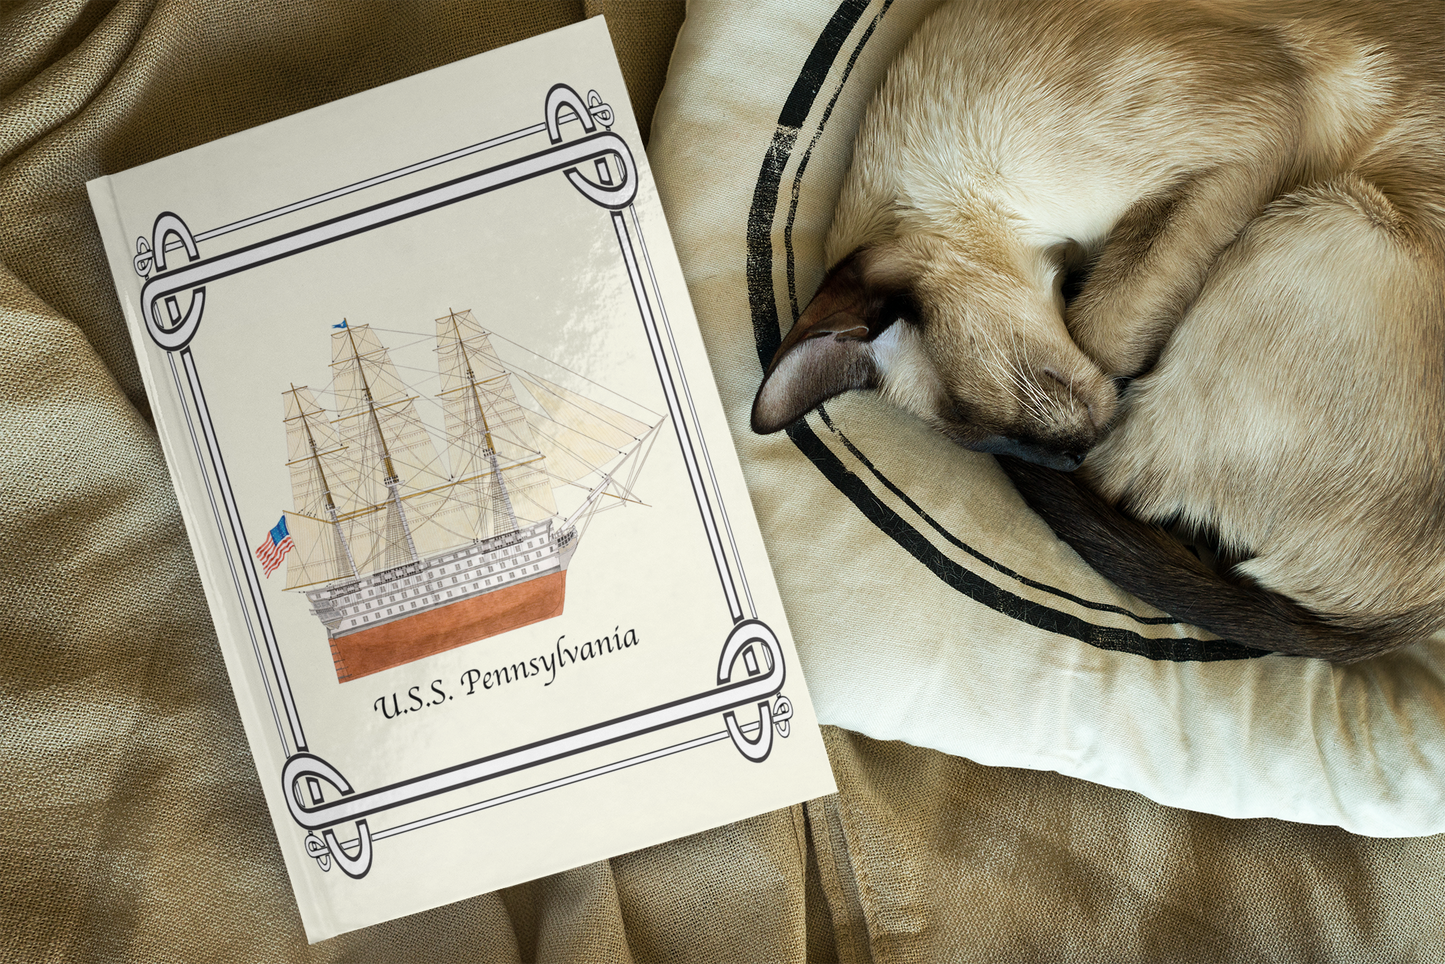 The U.S.S. Pennsylvania was a 120 gun first-rate ship of the line. A handsome Journal for the sailing enthusiast!   The journal design is a reproduction of an original watercolor by Lee M. Buchanan and has the image on the front and back of the book